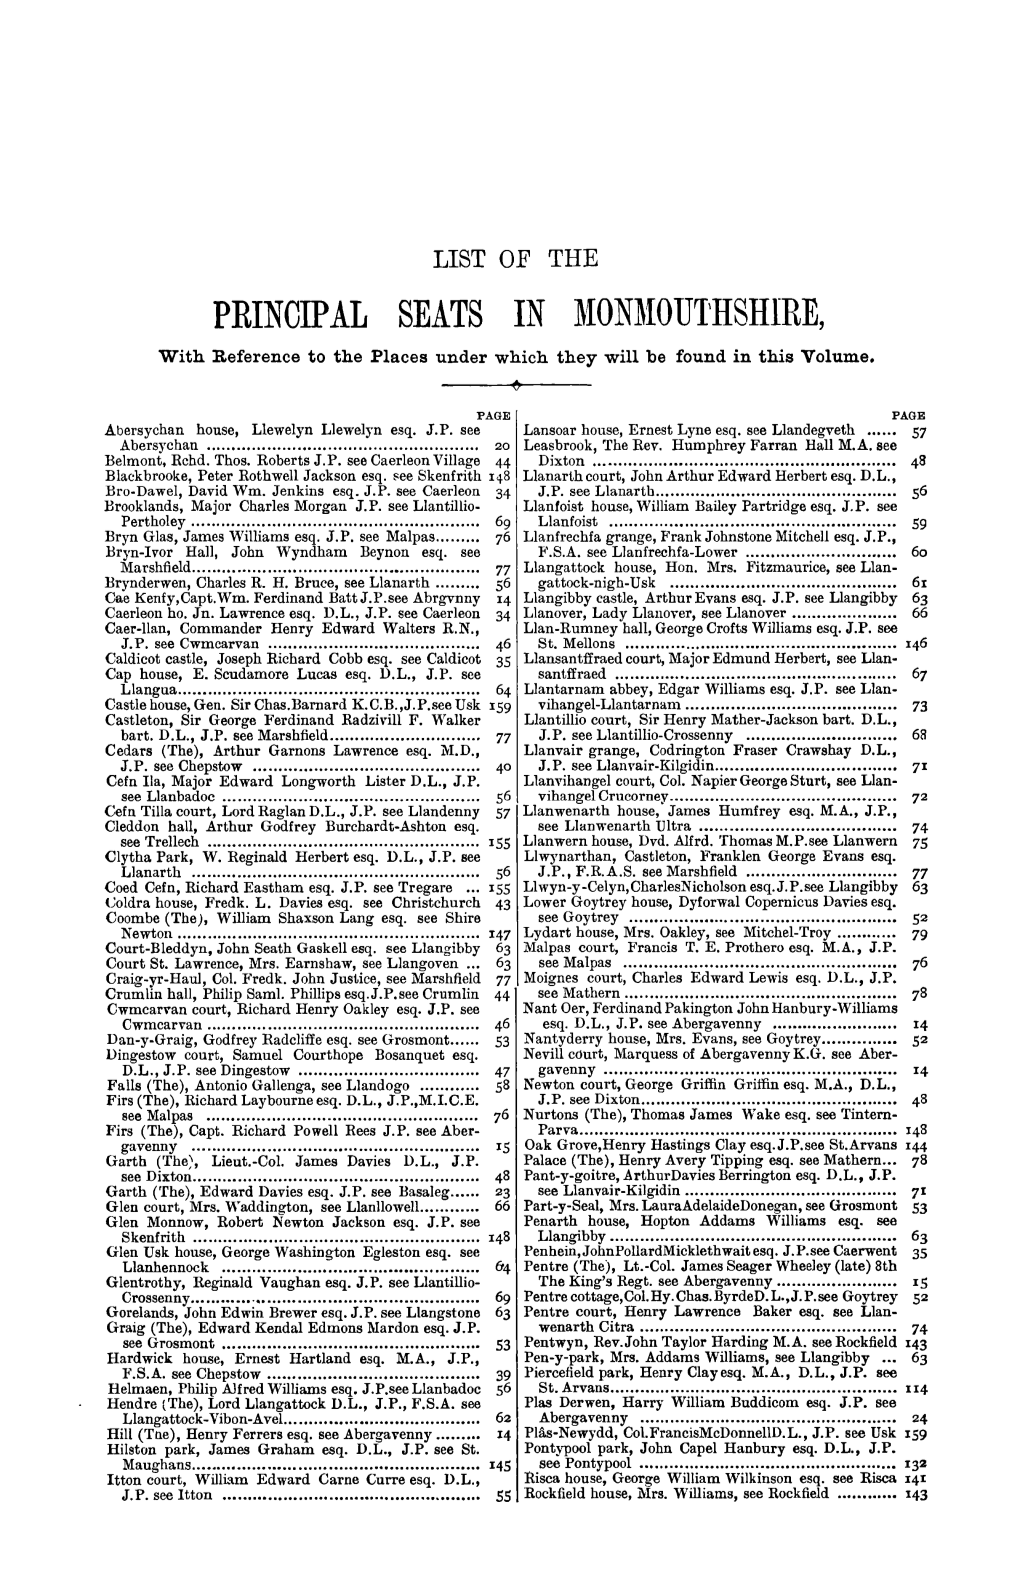 LIST of the PRINCIPAL SEATS in ~{ON~IOU'i'hshire, with Reference to the Places Under Which They Will Be Found in This Volume